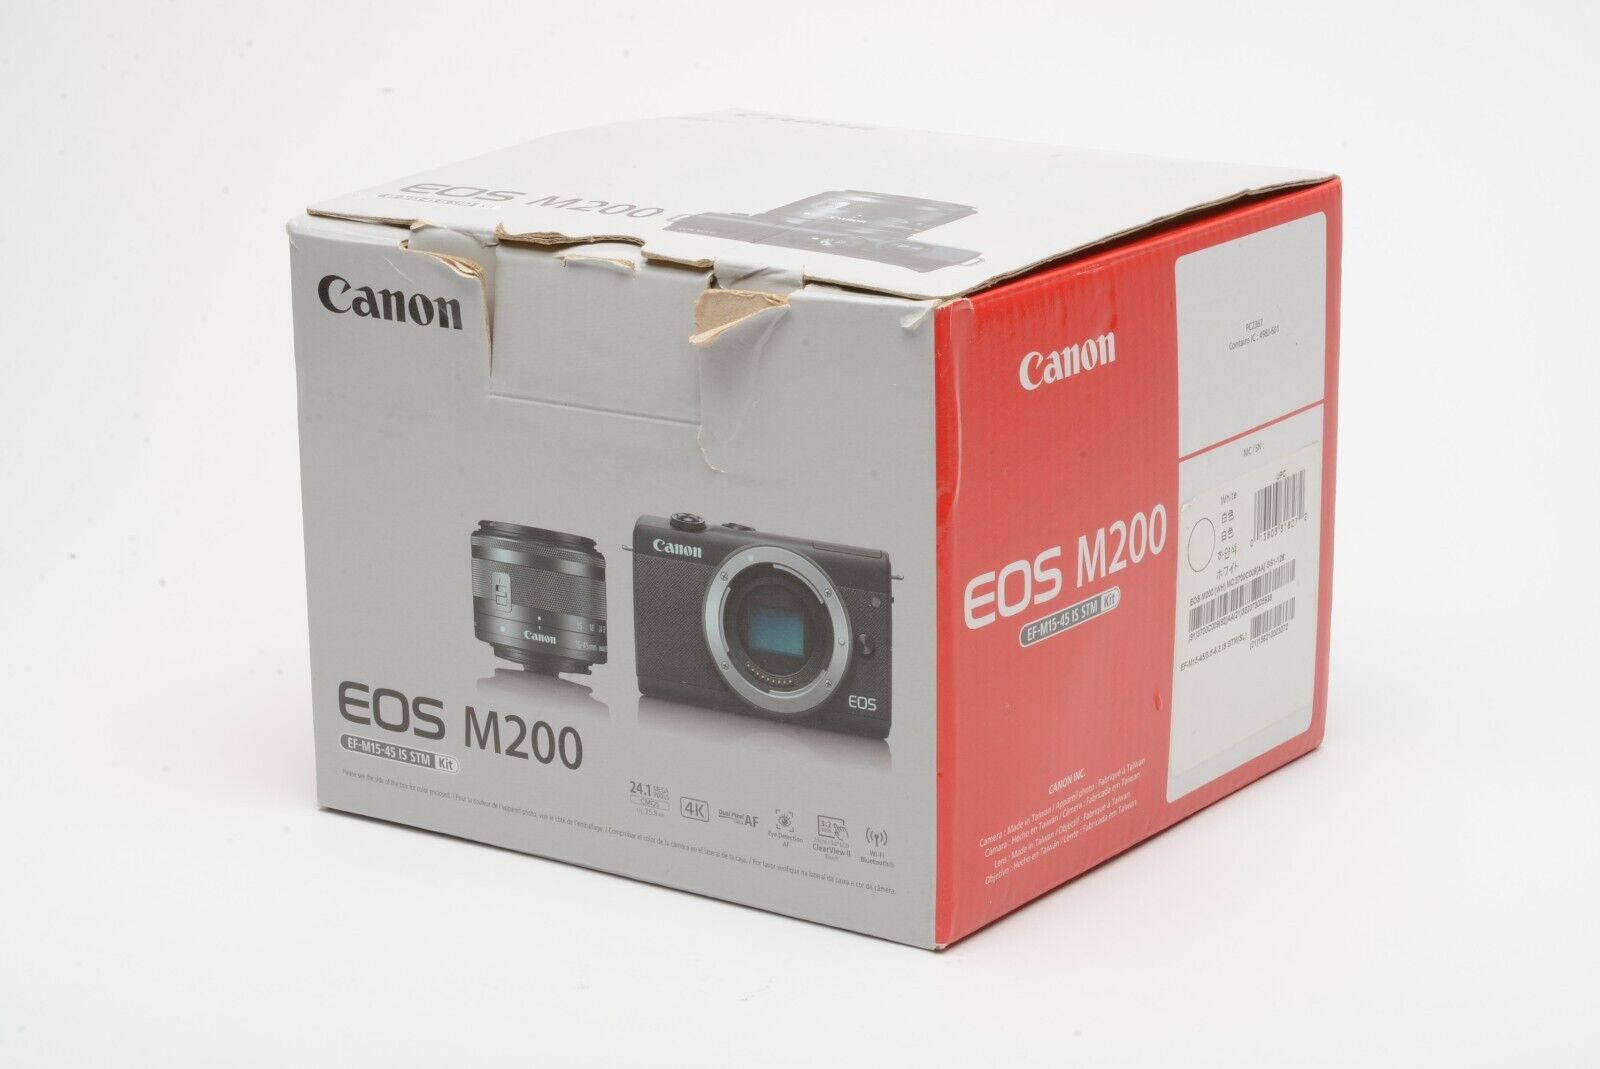 MINT- CANON EOS M200 24.1MP MIRRORLRSS KIT w/EF-M 15-45mm IS STM